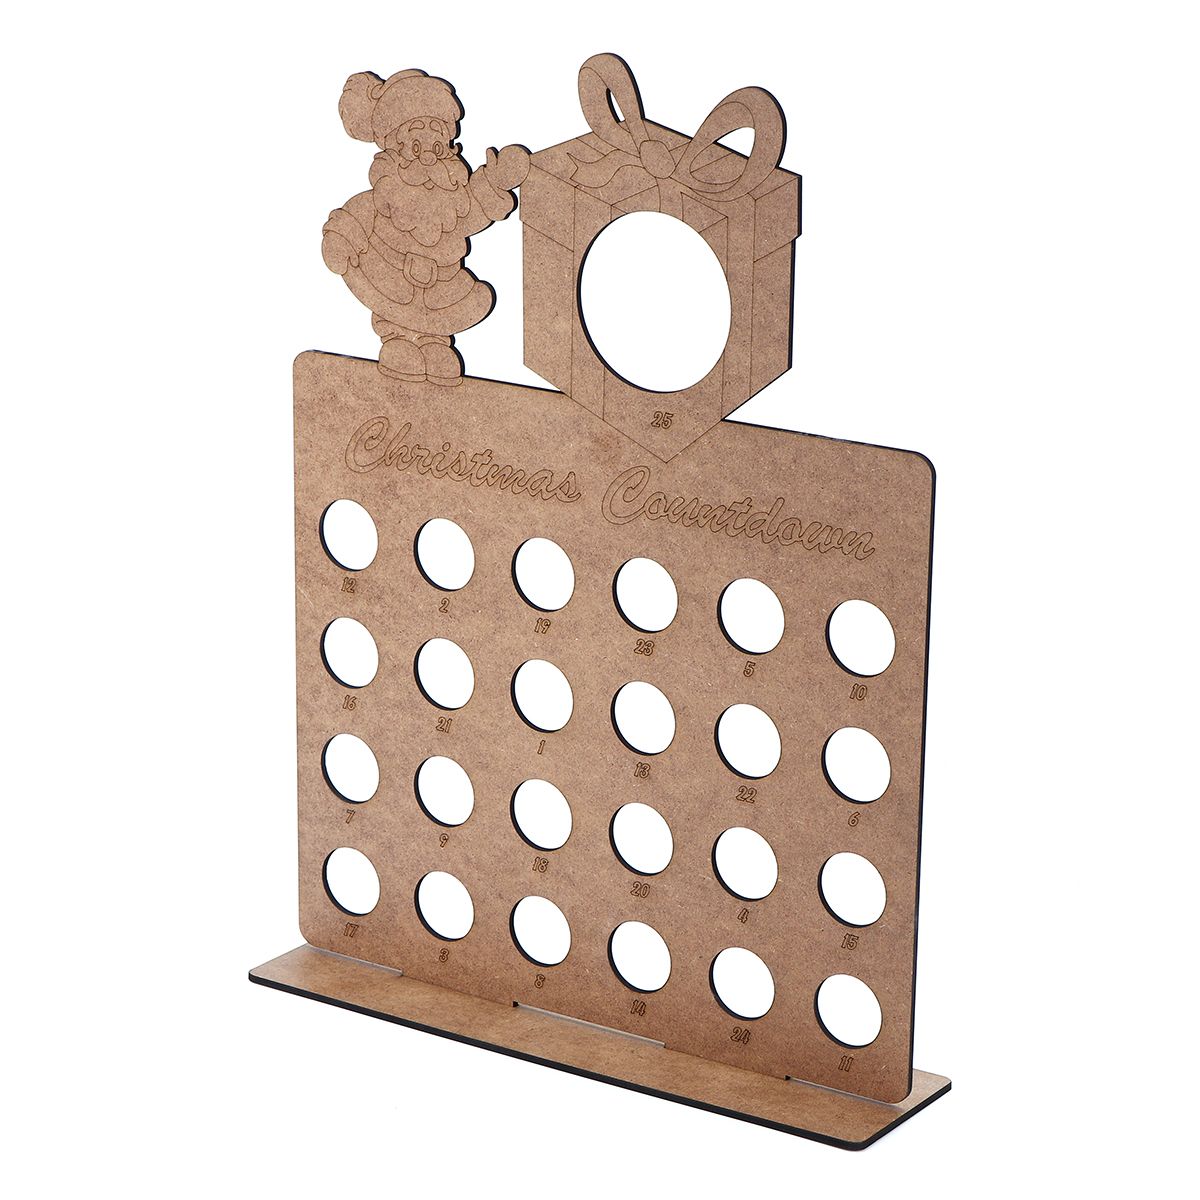 Wooden-Advent-Calendar-Christmas-Tree-24-Chocolates-Stand-Rack-Home-Decorations-1458956